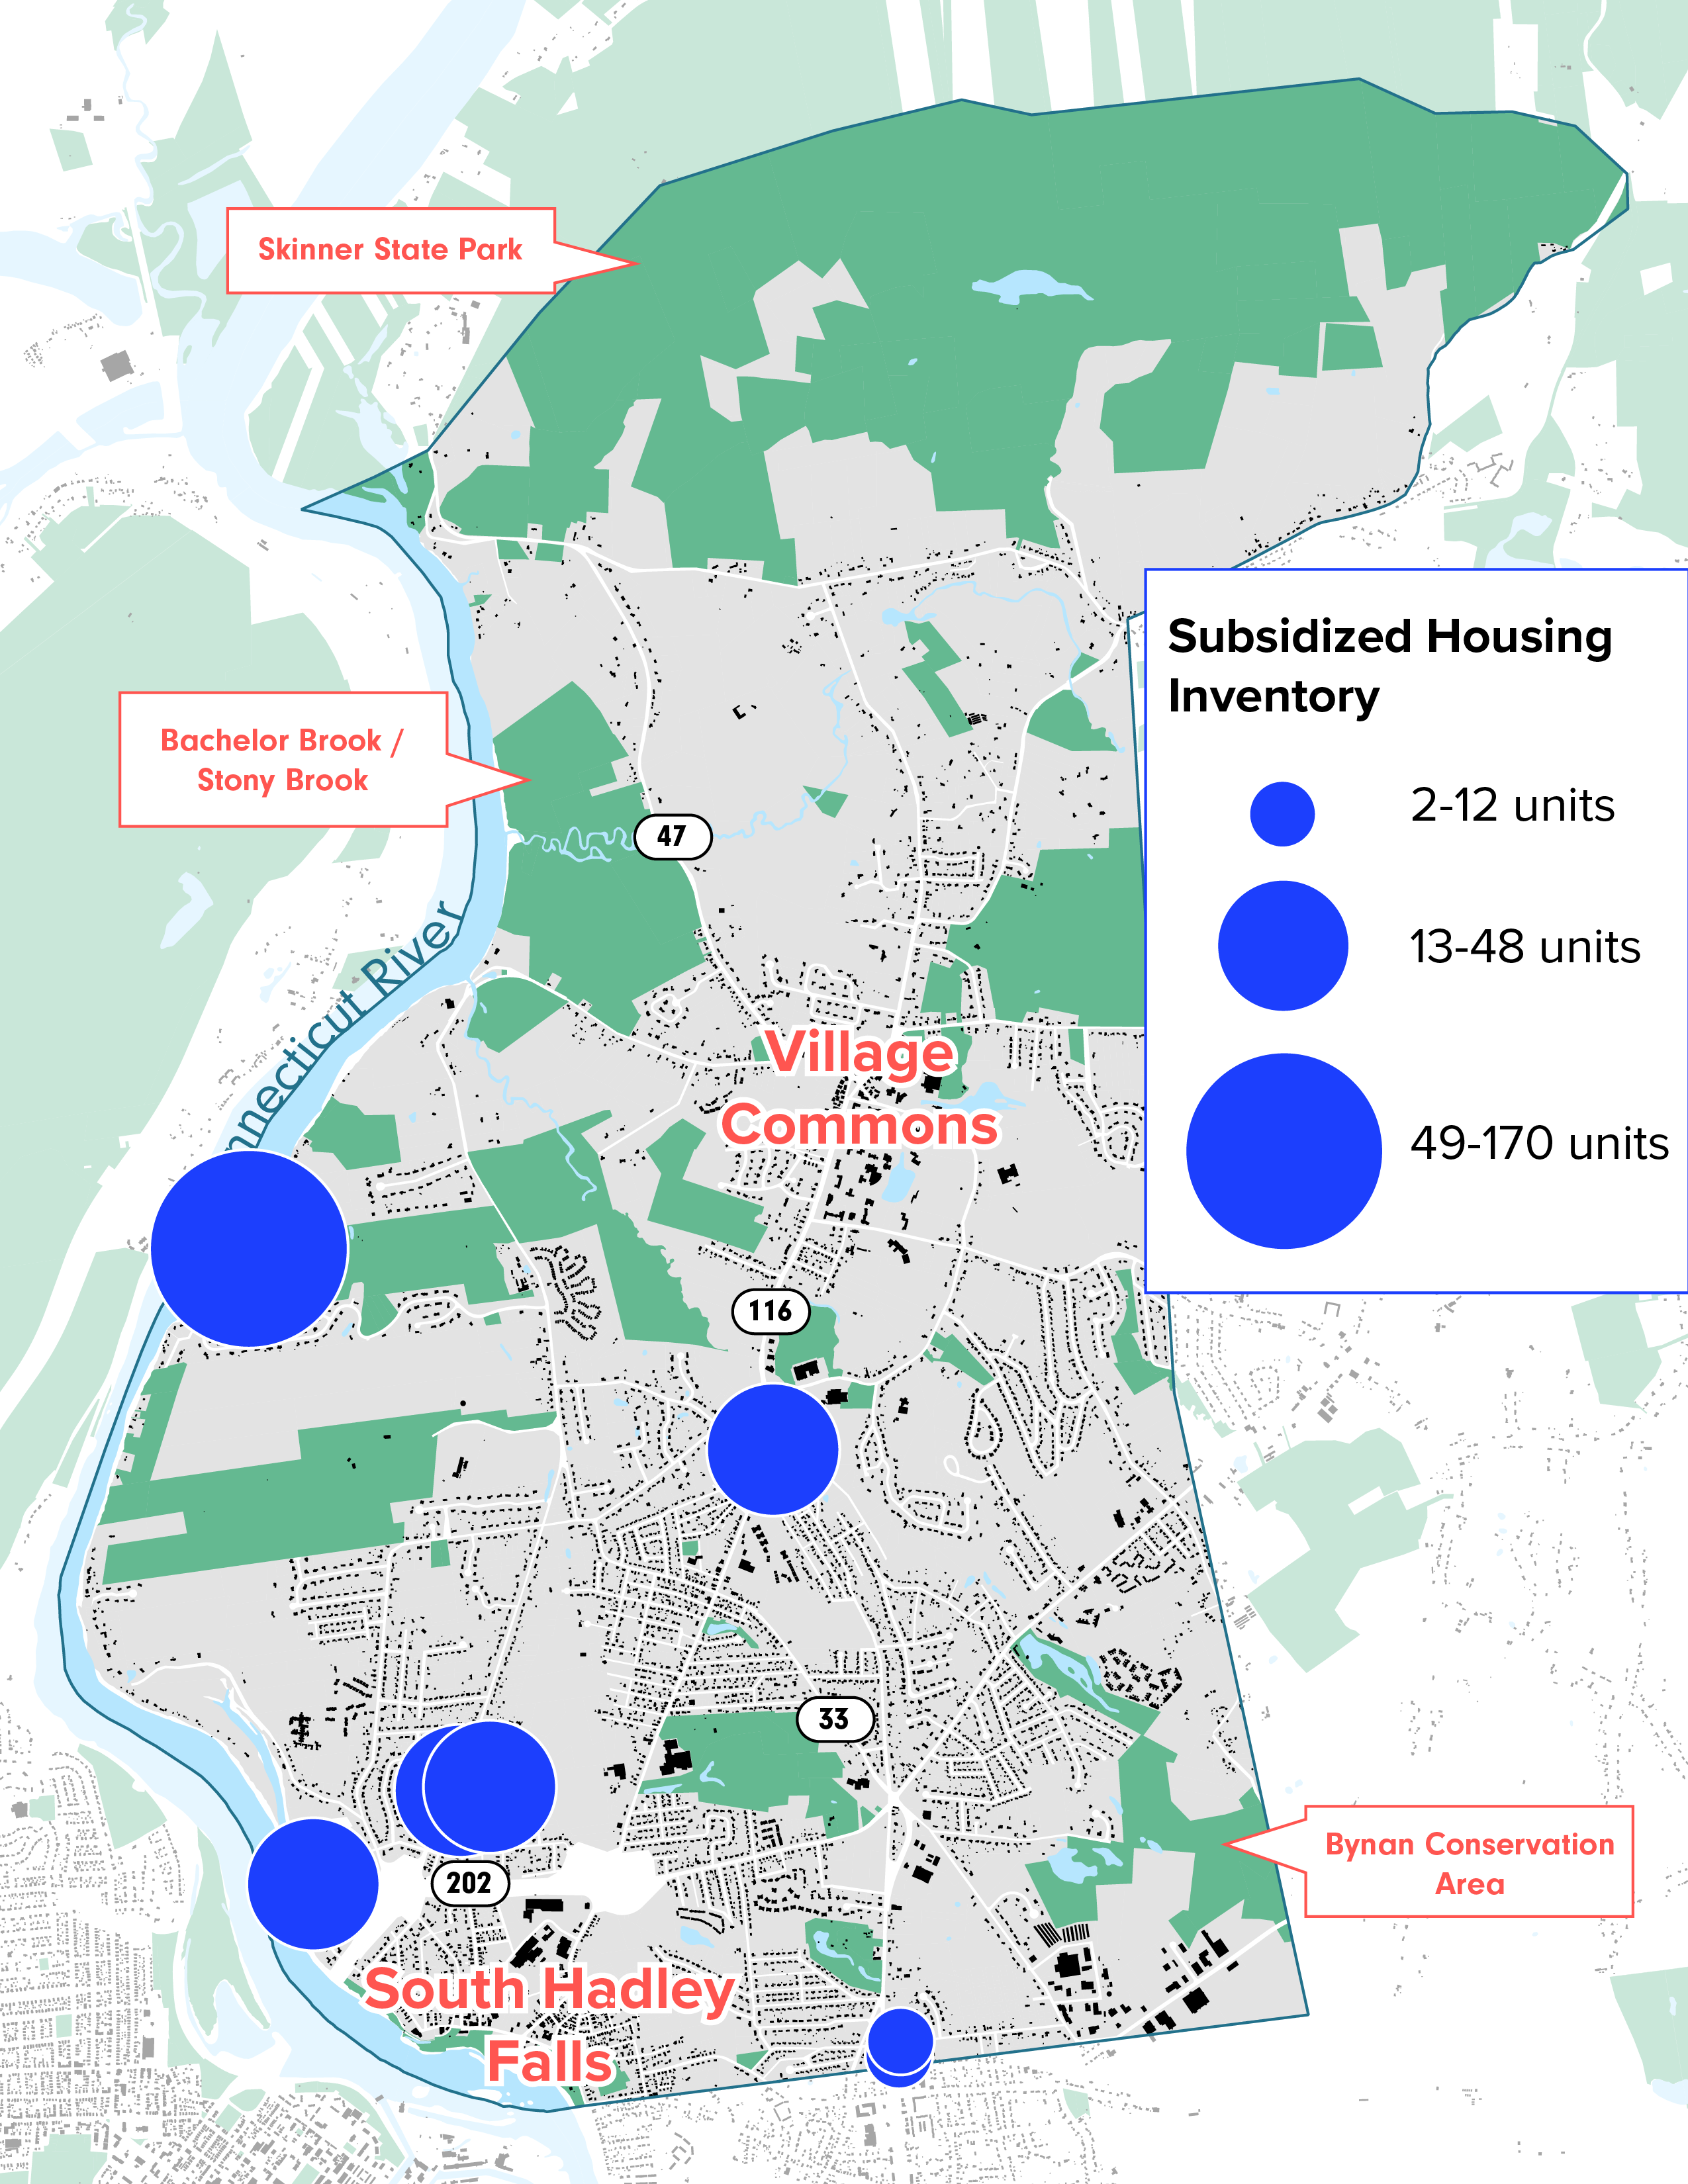 A map of South Hadley with homes on the town's Subsidized Housing Inventory mapped. The map shows units predominantly in the southern half of the town, with a cluster of multiple developments in and around South Hadley Falls